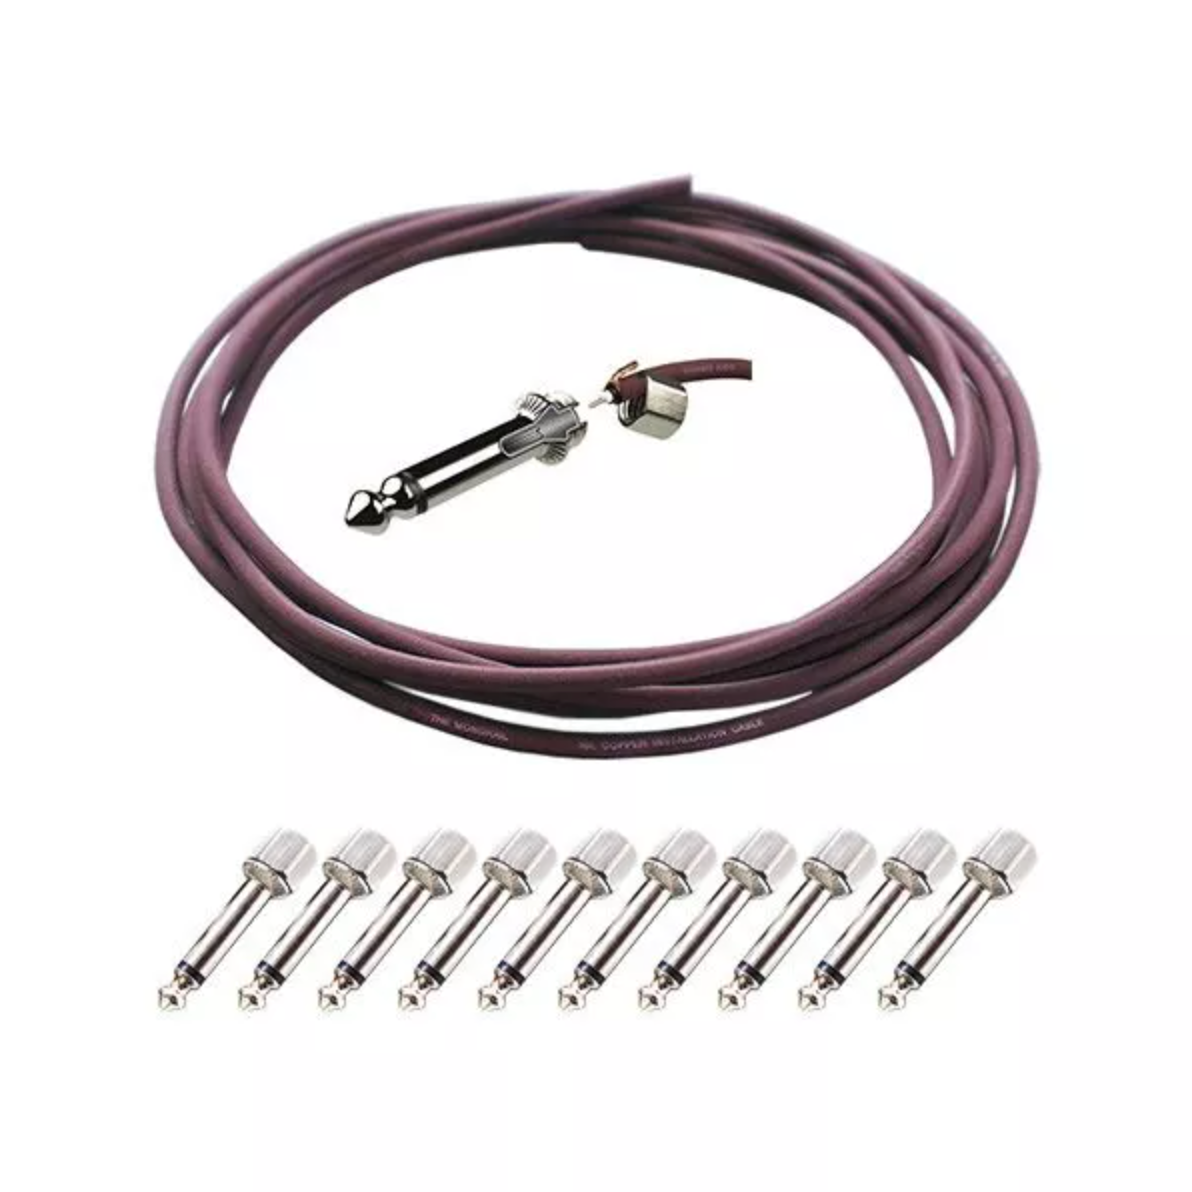 Evidence Audio SIS1 Solderless Cable Kit - Burgundy (5 FEET OF CABLE & 8 PLUGS)